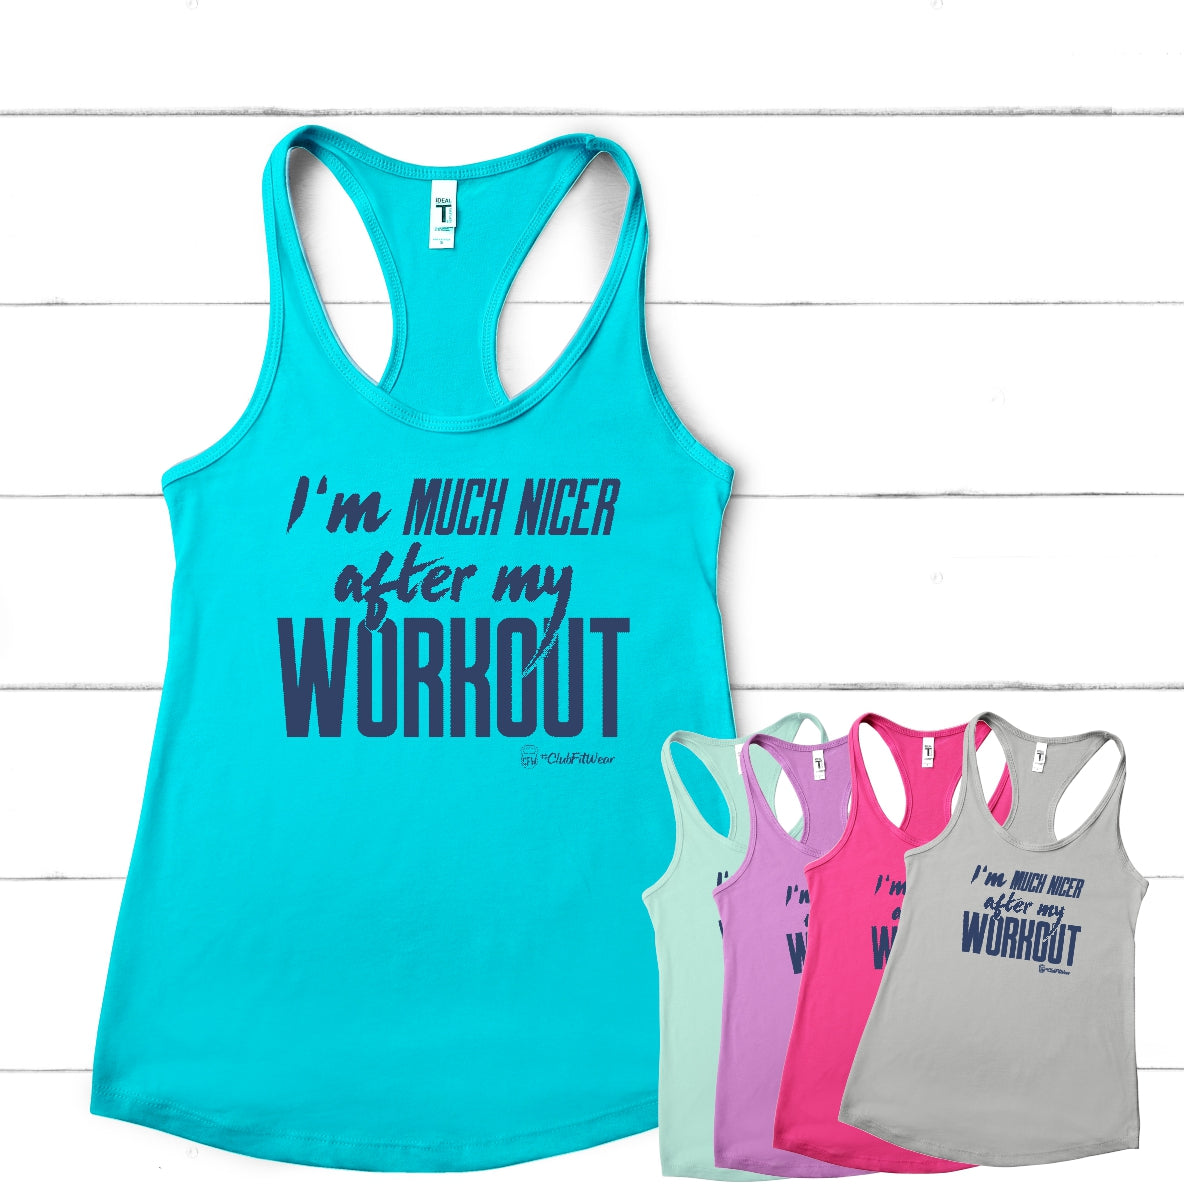 I'm much nicer after my workout – ClubFitWear